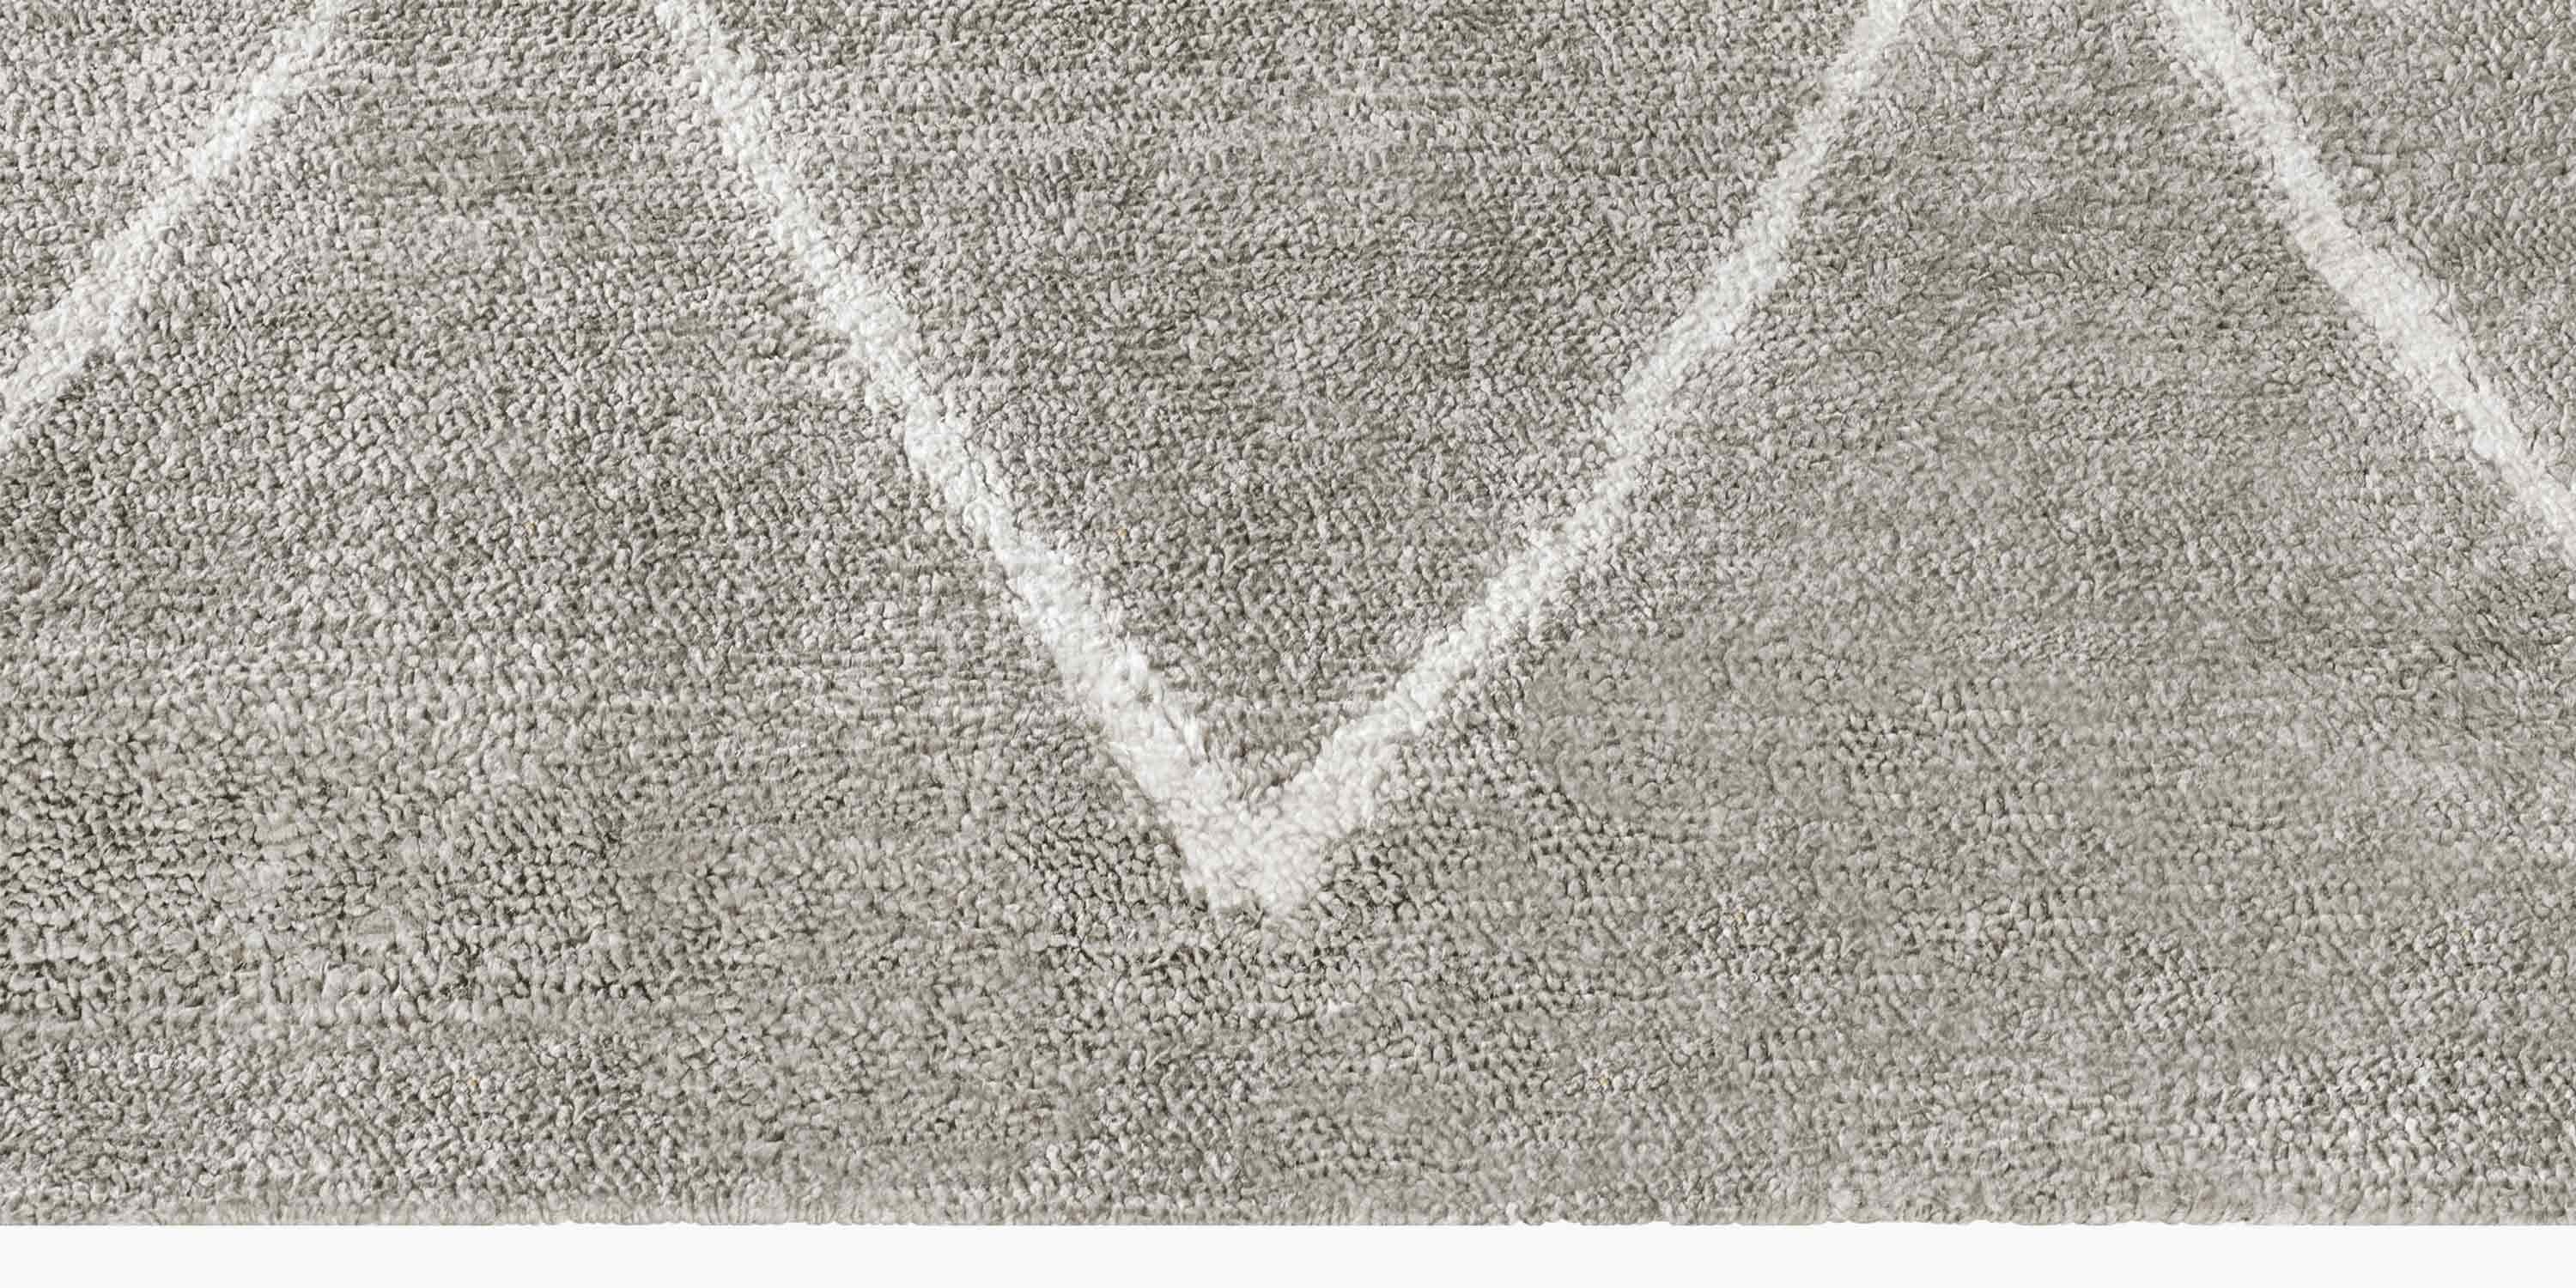 For Sale: Gray Ben Soleimani Arlequin Rug– Ultra-plush Hand-knotted Viscose Charcoal 8'x10' 3